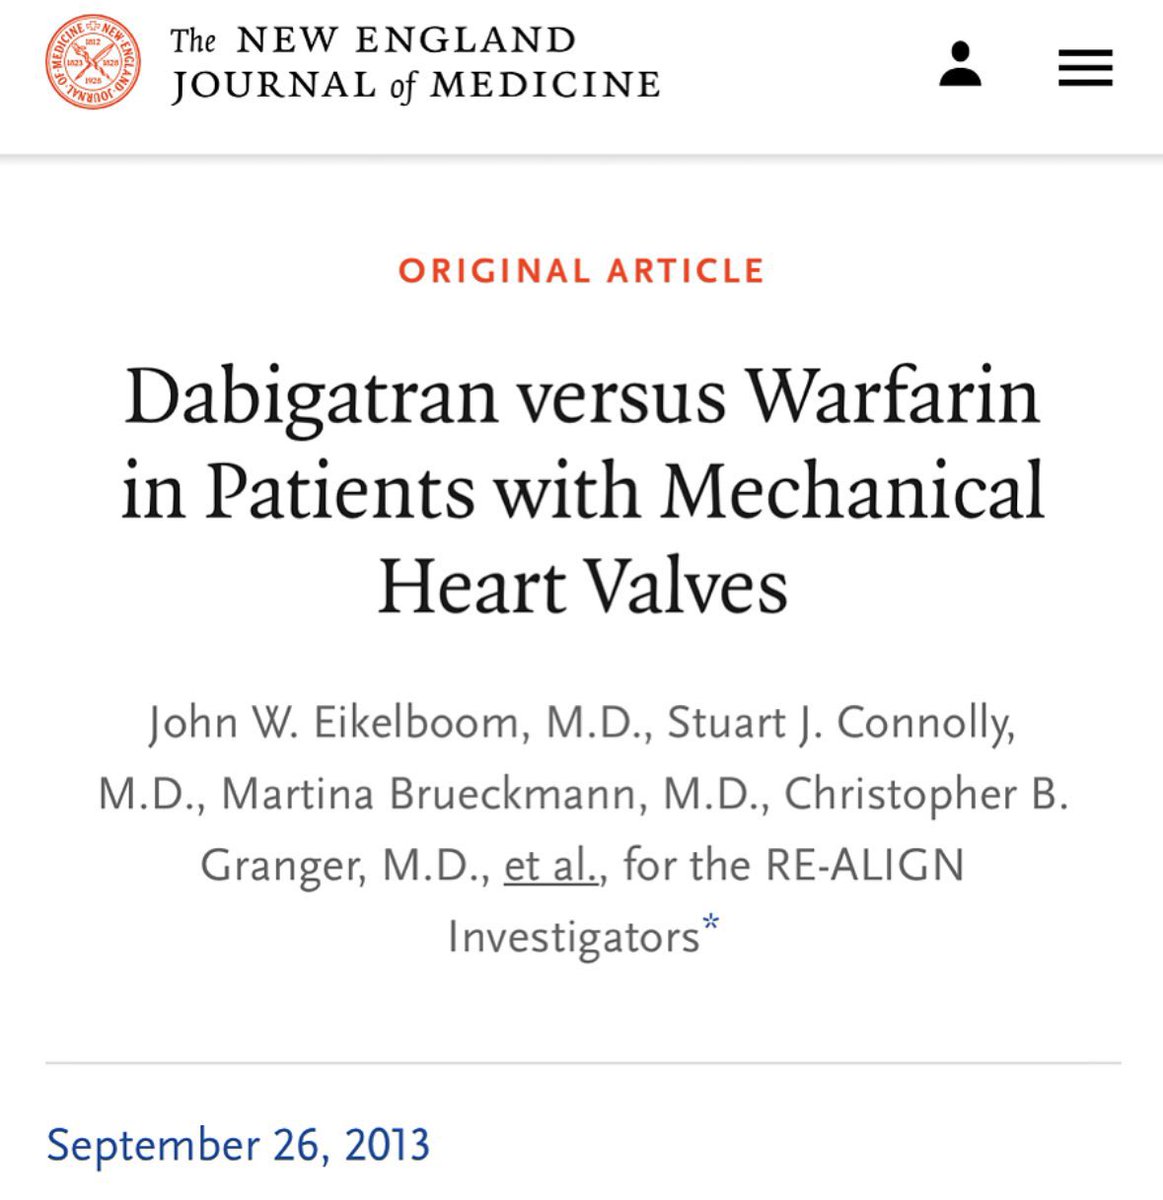 Choice of anticoagulation in patients with mechanical valves? DOACs are routinely used in venous thromboembolism and nonvalvular atrial fibrillation – but are proven INFERIOR to warfarin in patients with mechanical valves (or valvular afib☝️). RE-ALIGN Trial, NEJM 2013 ♥️